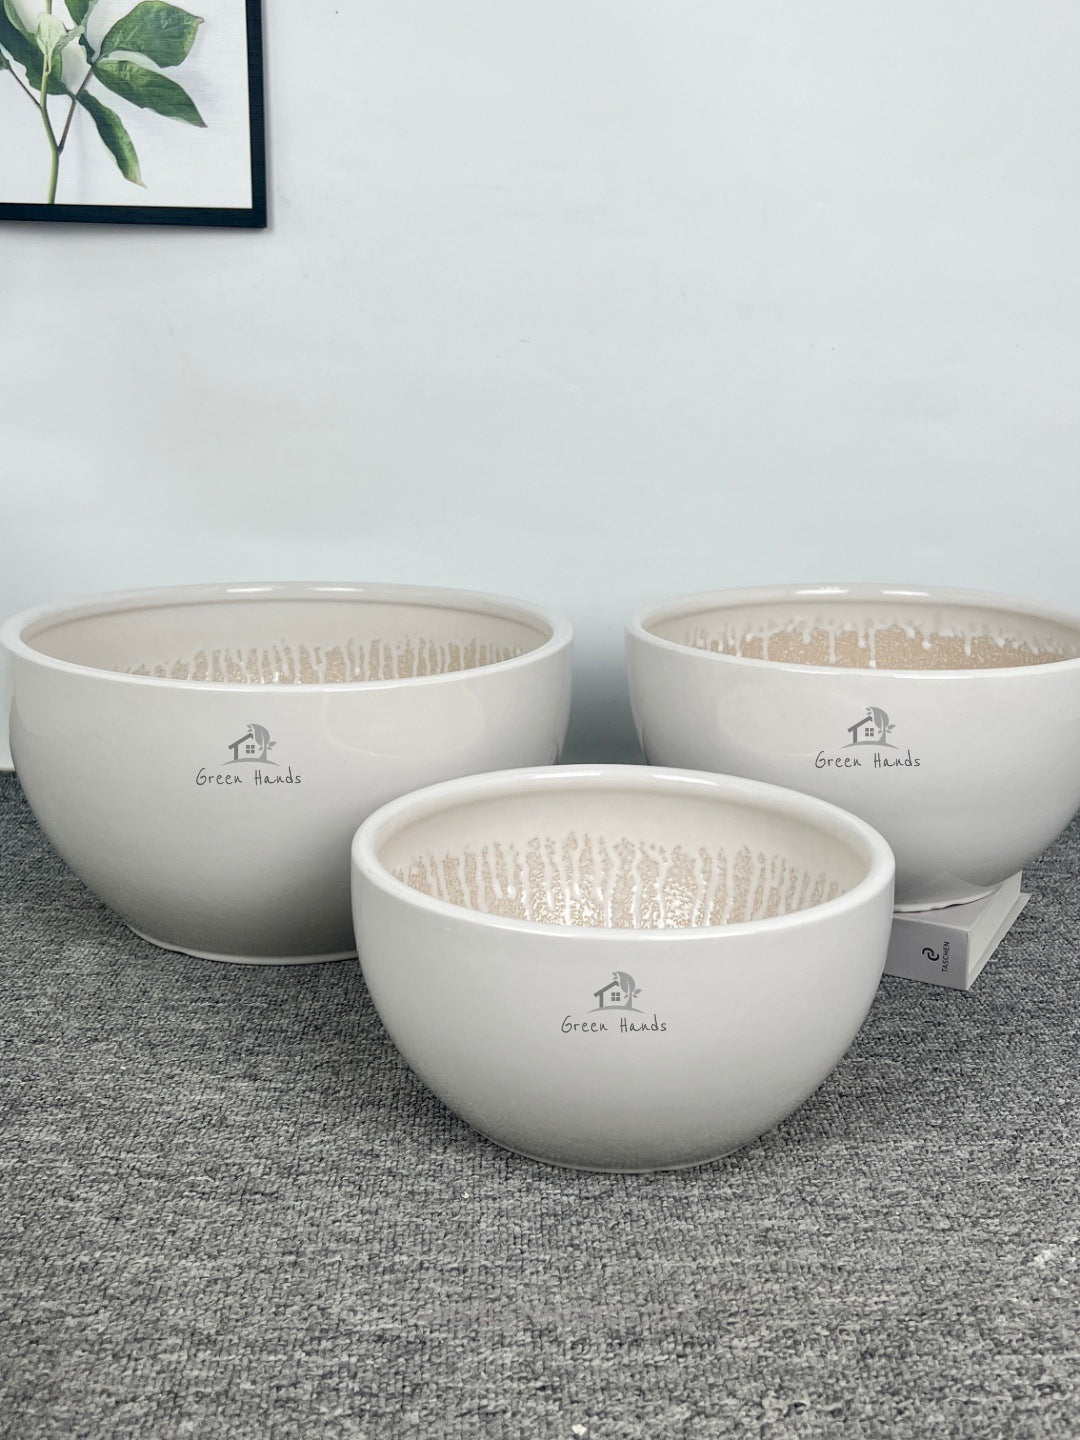 Bonsai-Style Flat Glossy White Ceramic Pots: Contemporary Decor for Offices & Homes in Dubai & Abu Dhabi | Perfect for Plants | Drain Holes and Base Plates